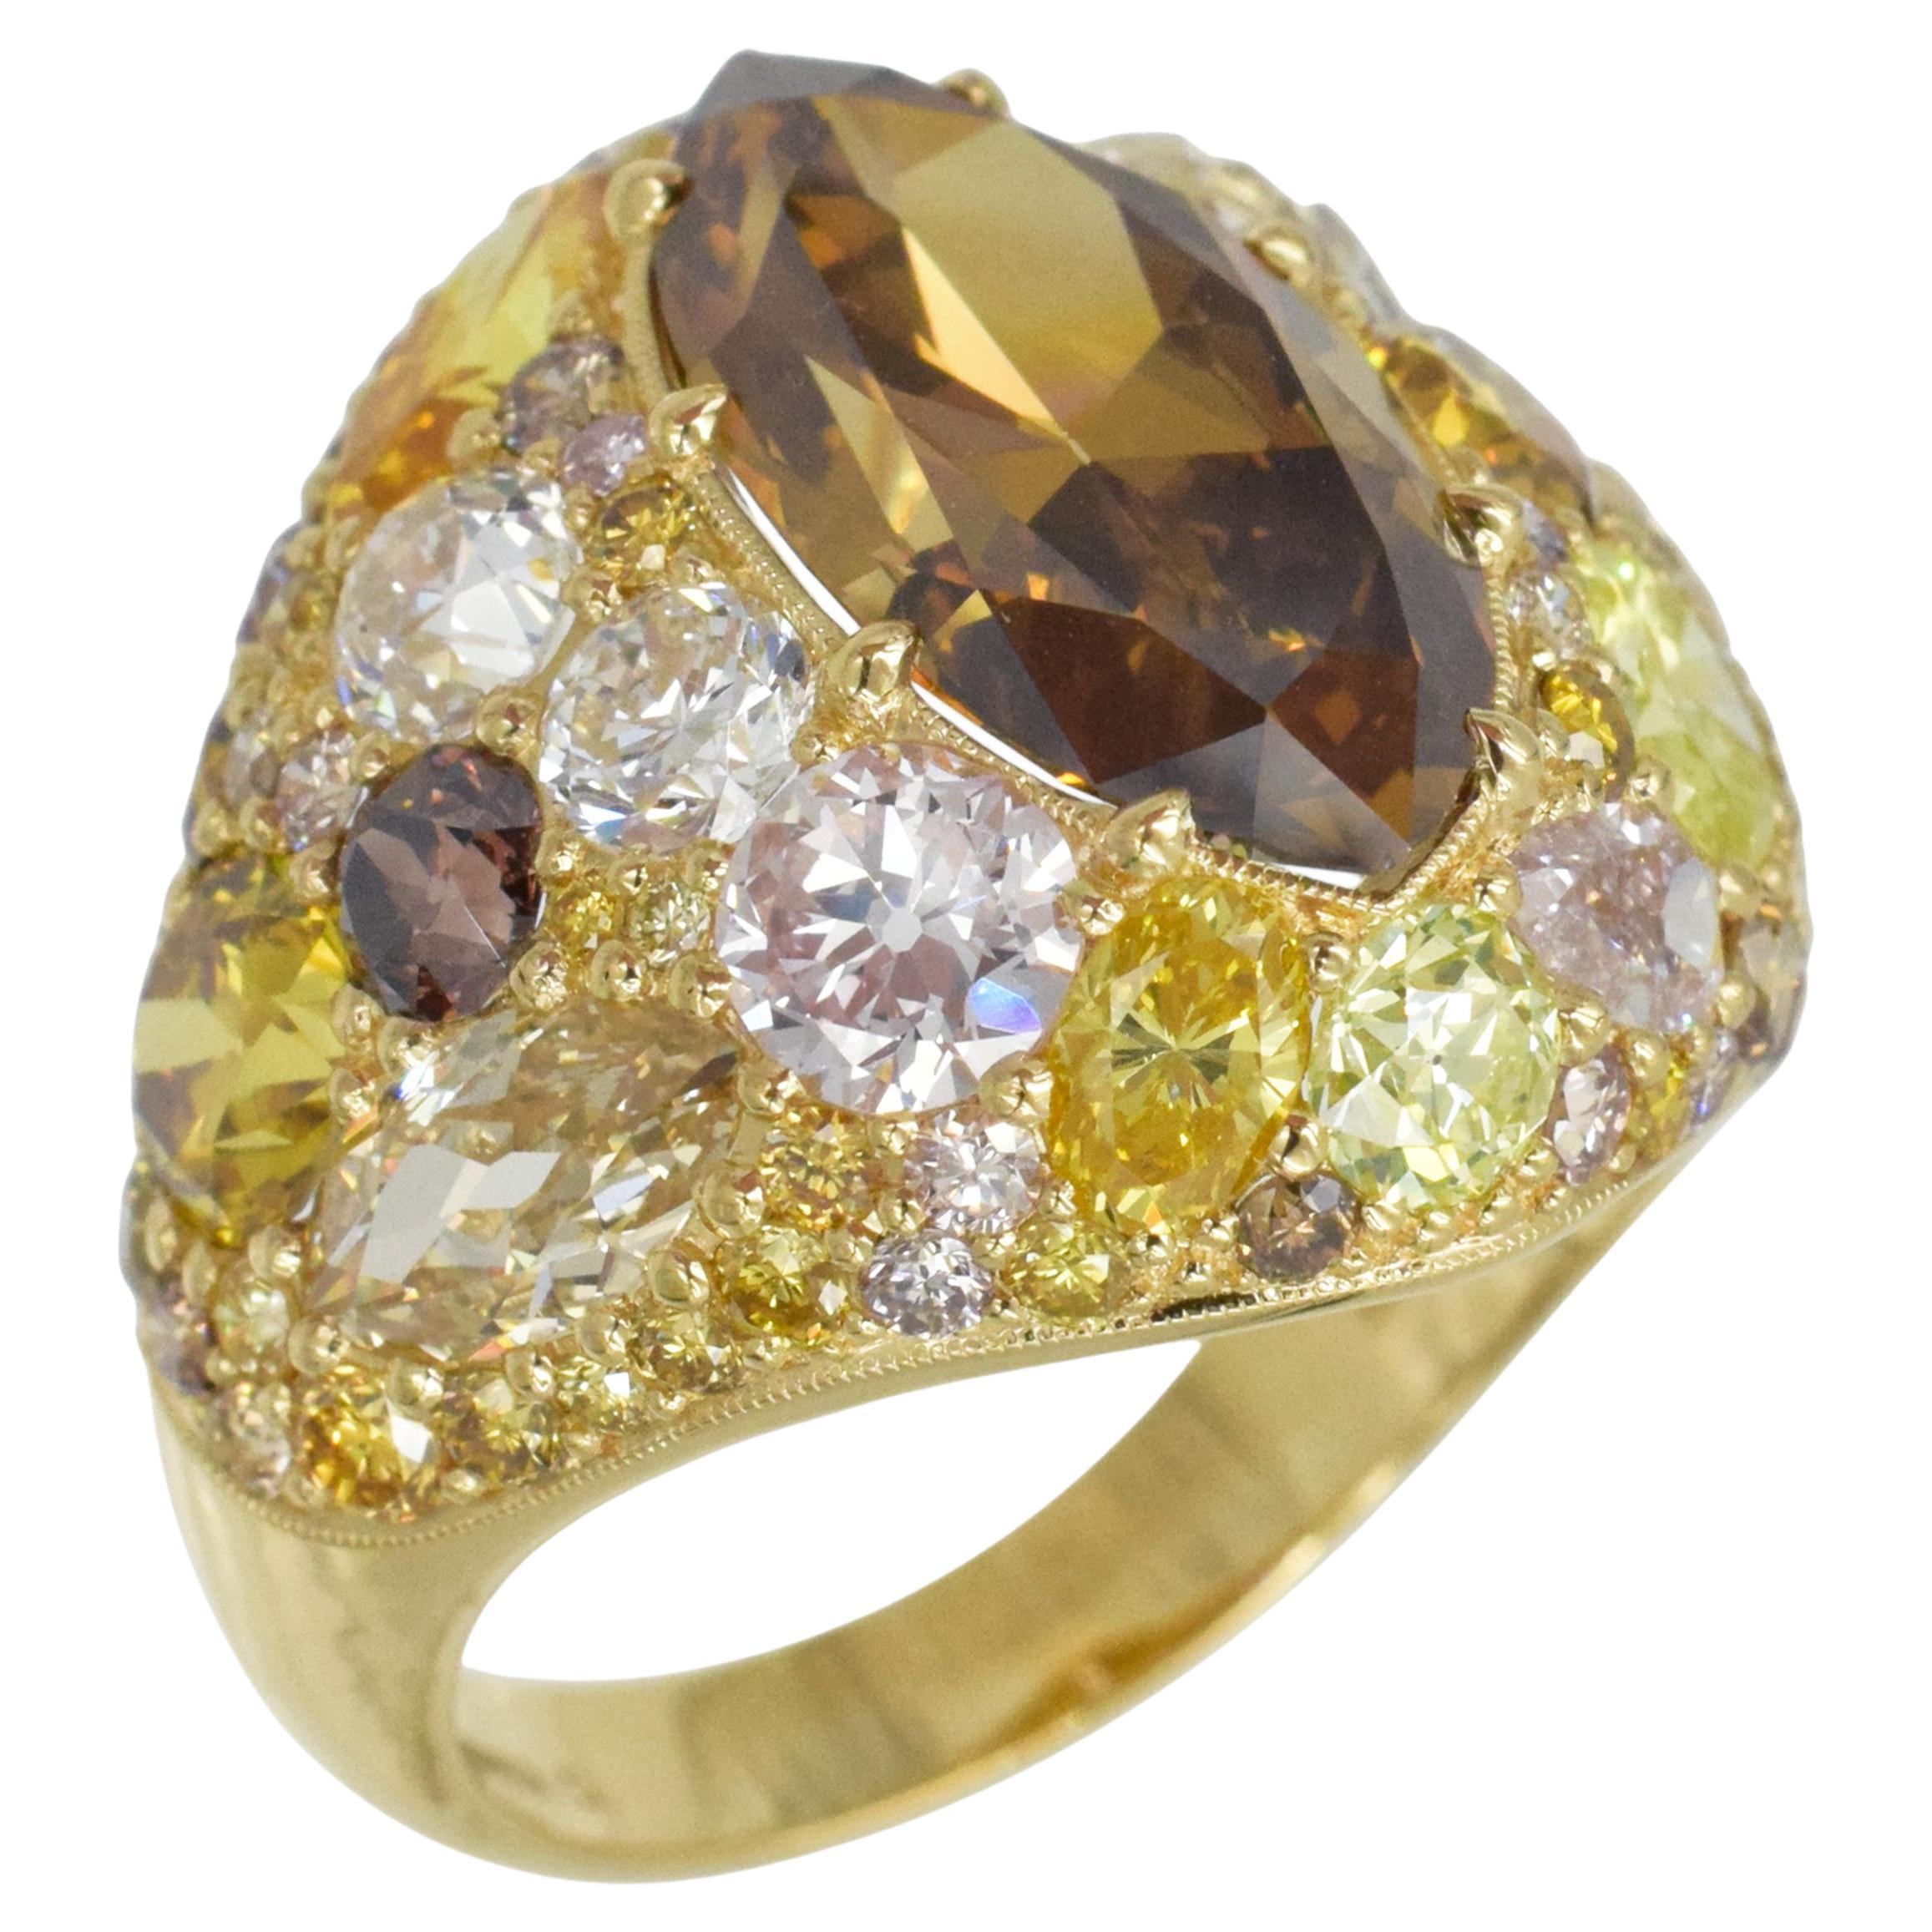 GIA certified Colored Diamond Ring. This bombe style ring has with a center diamond of 4.28 carat marquise shape. diamond with GIA Certificate color: Fancy Deep Brown-Orange, Clarity:VS2 set in 18k yellow gold.

The setting has 55 yellow round